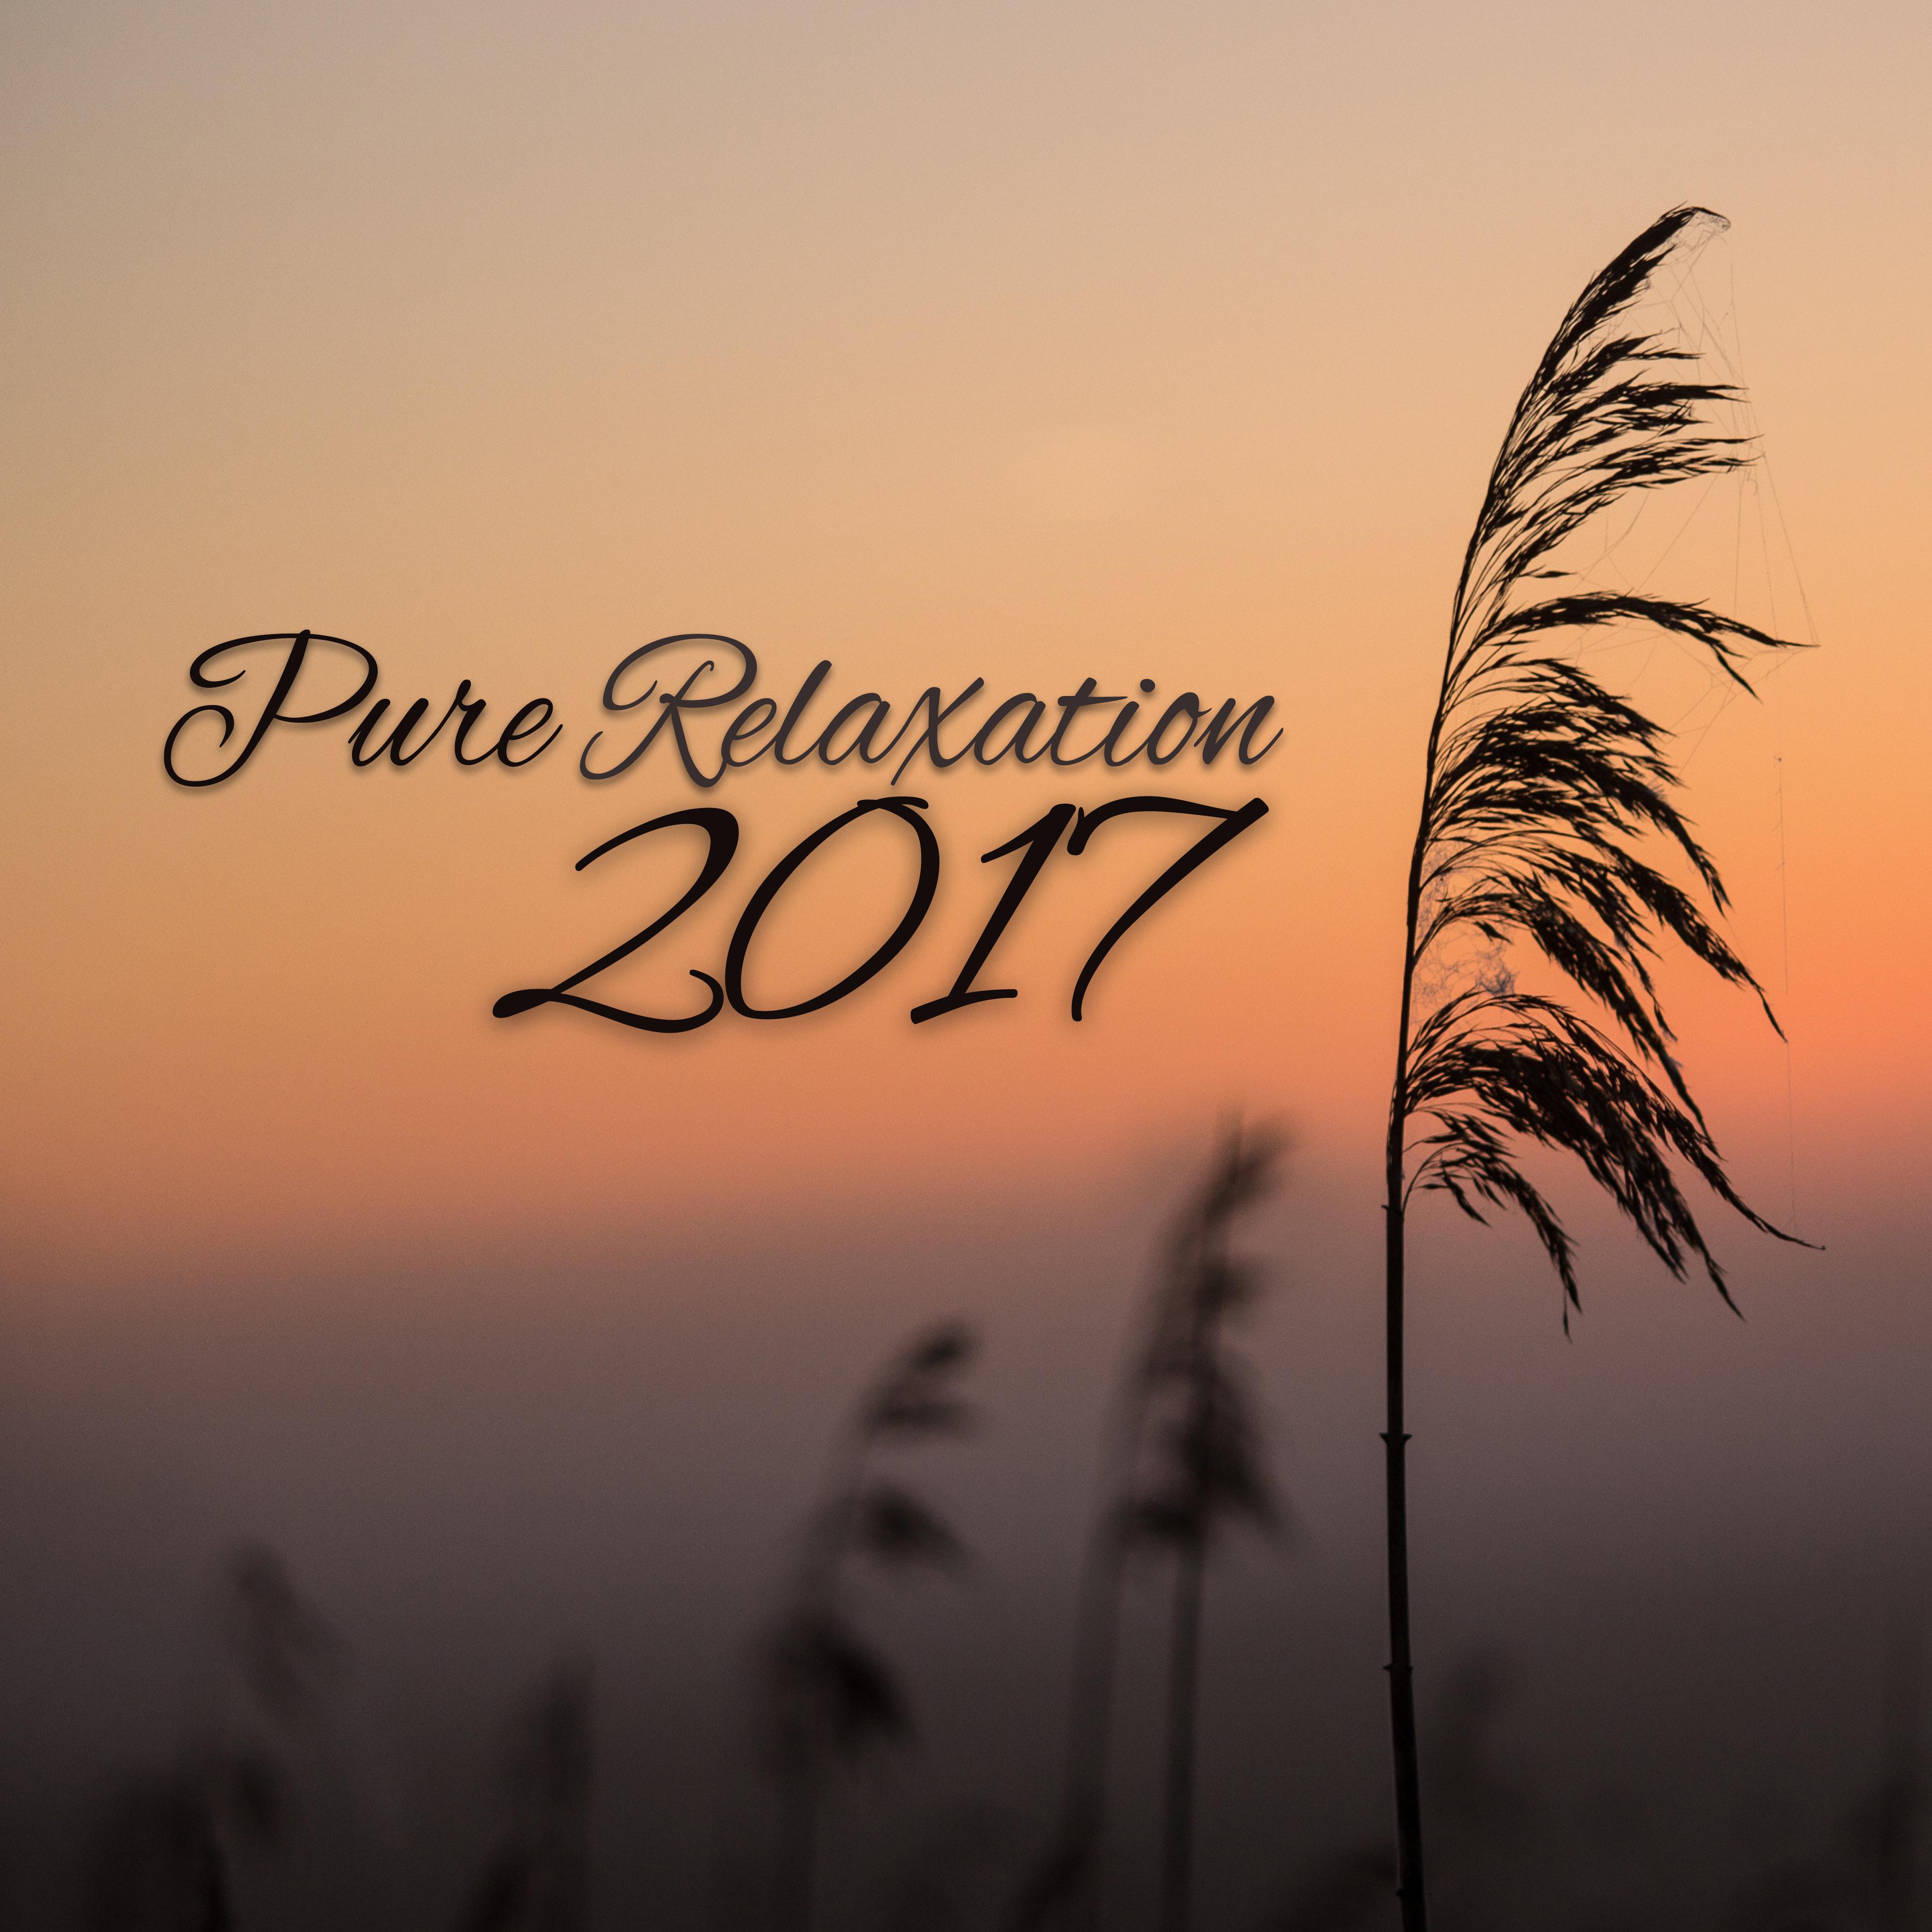 Pure Relaxation 2017 – New Album for Deep Relaxation, New Age Instrumental, Zen, Spa